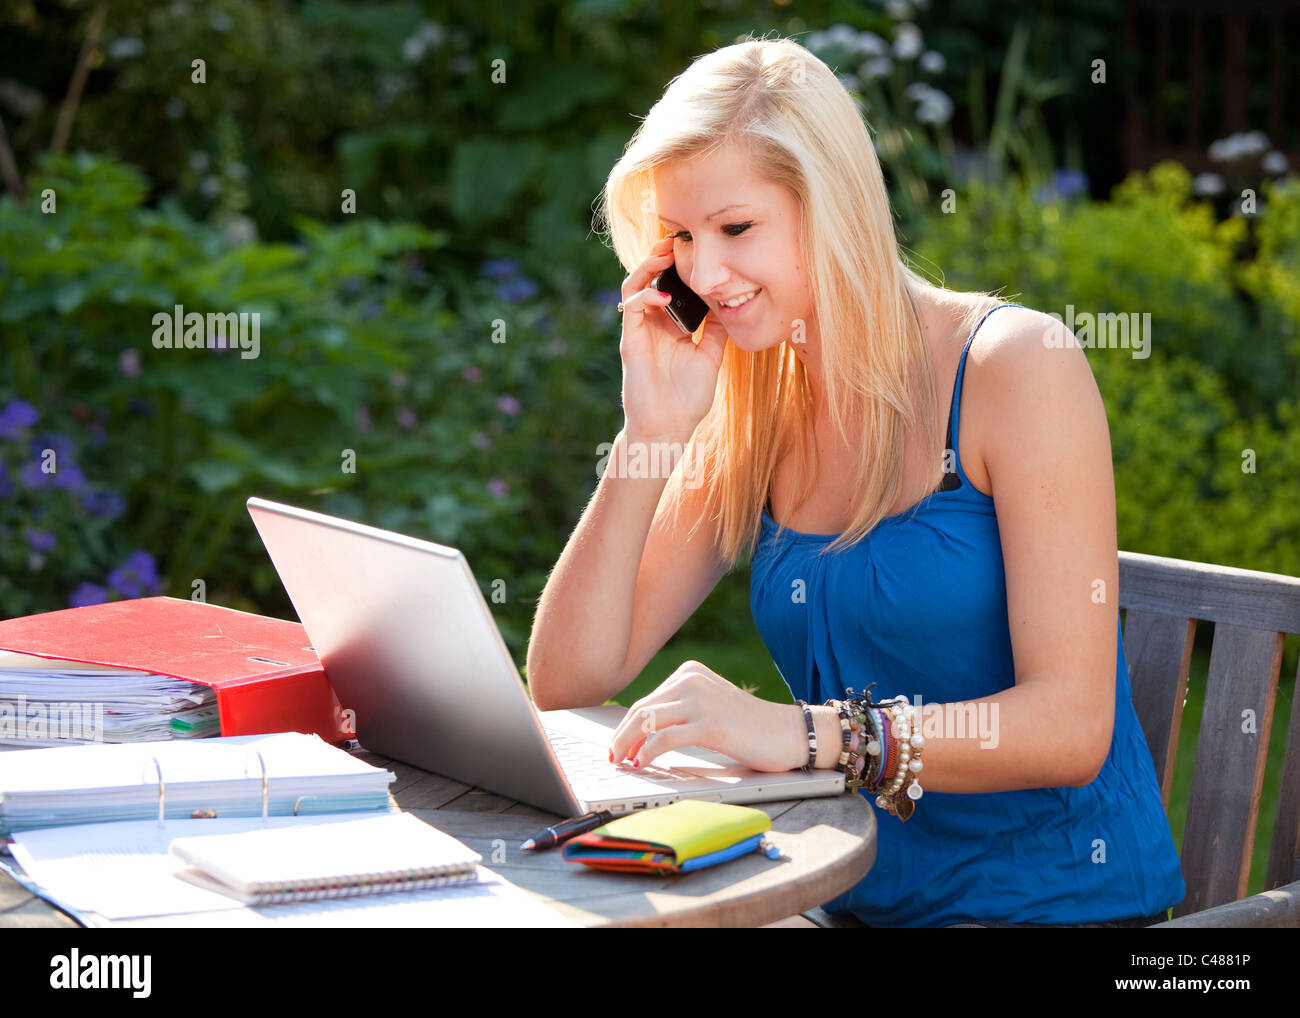 Young girl Chatting on moblie phone while on the internet, socializing on wireless laptop computer in the garden Stock Photo